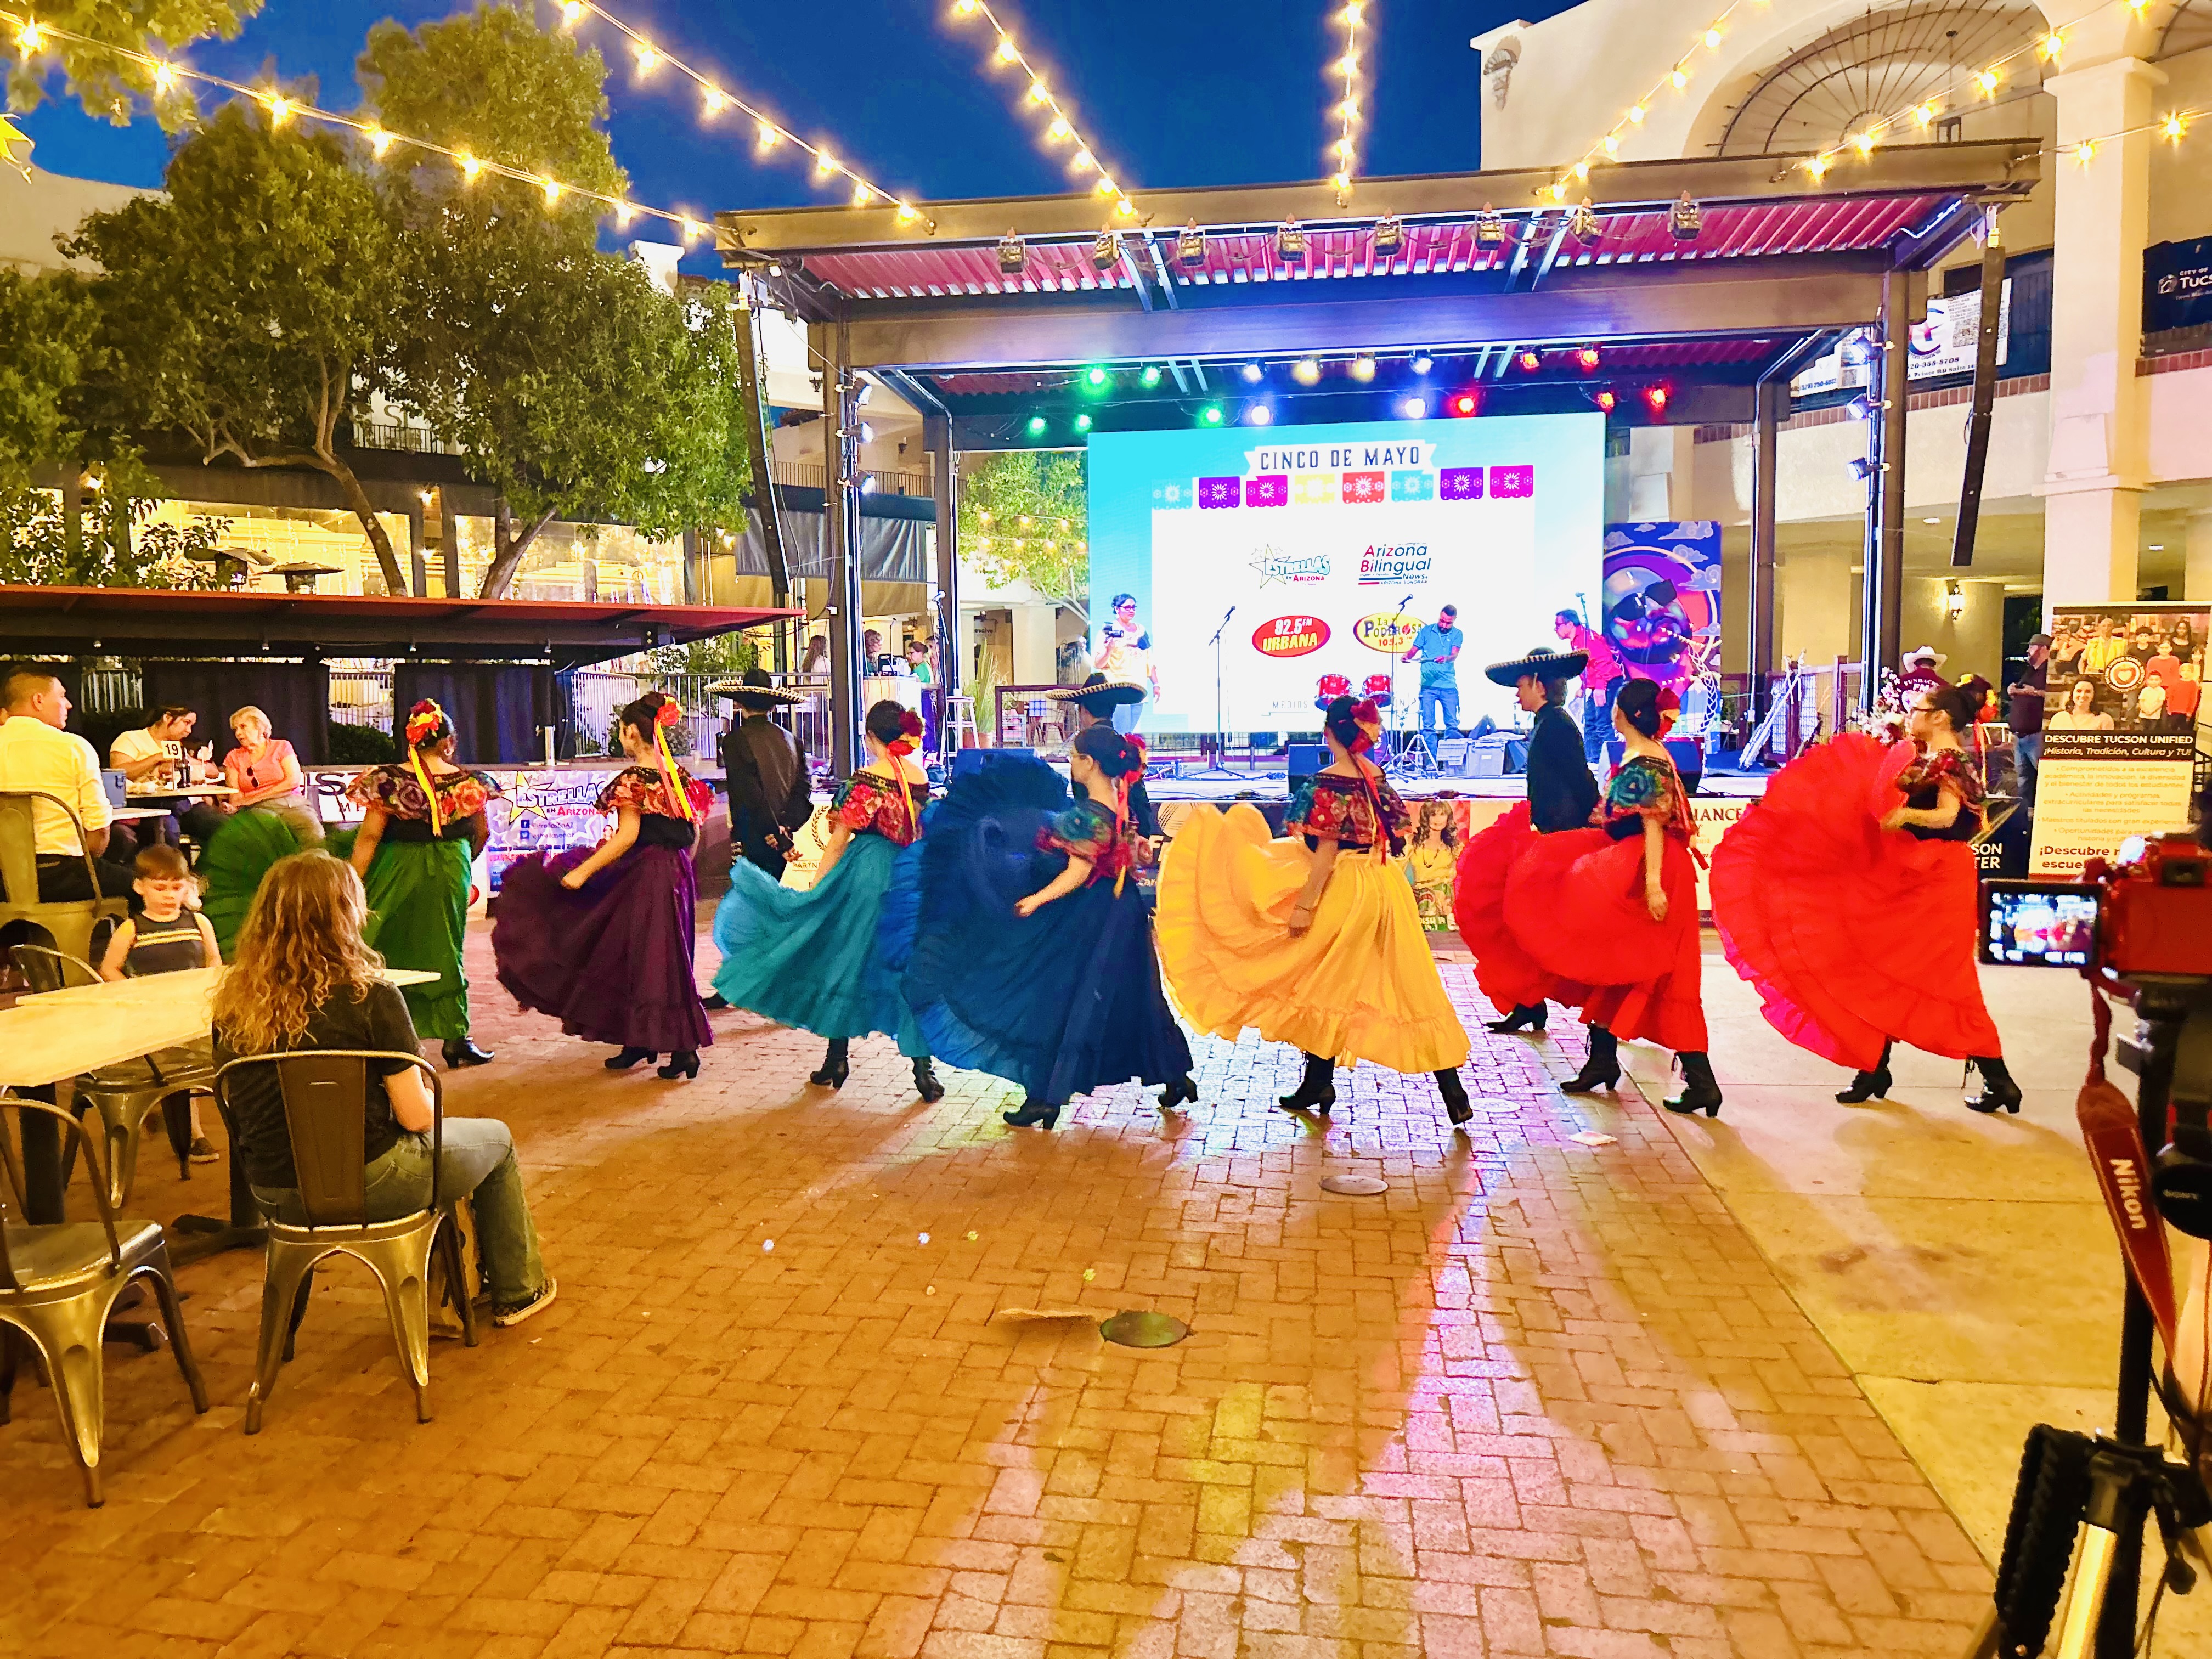 A group of performers dance at the Cinco De Mayo Celebration